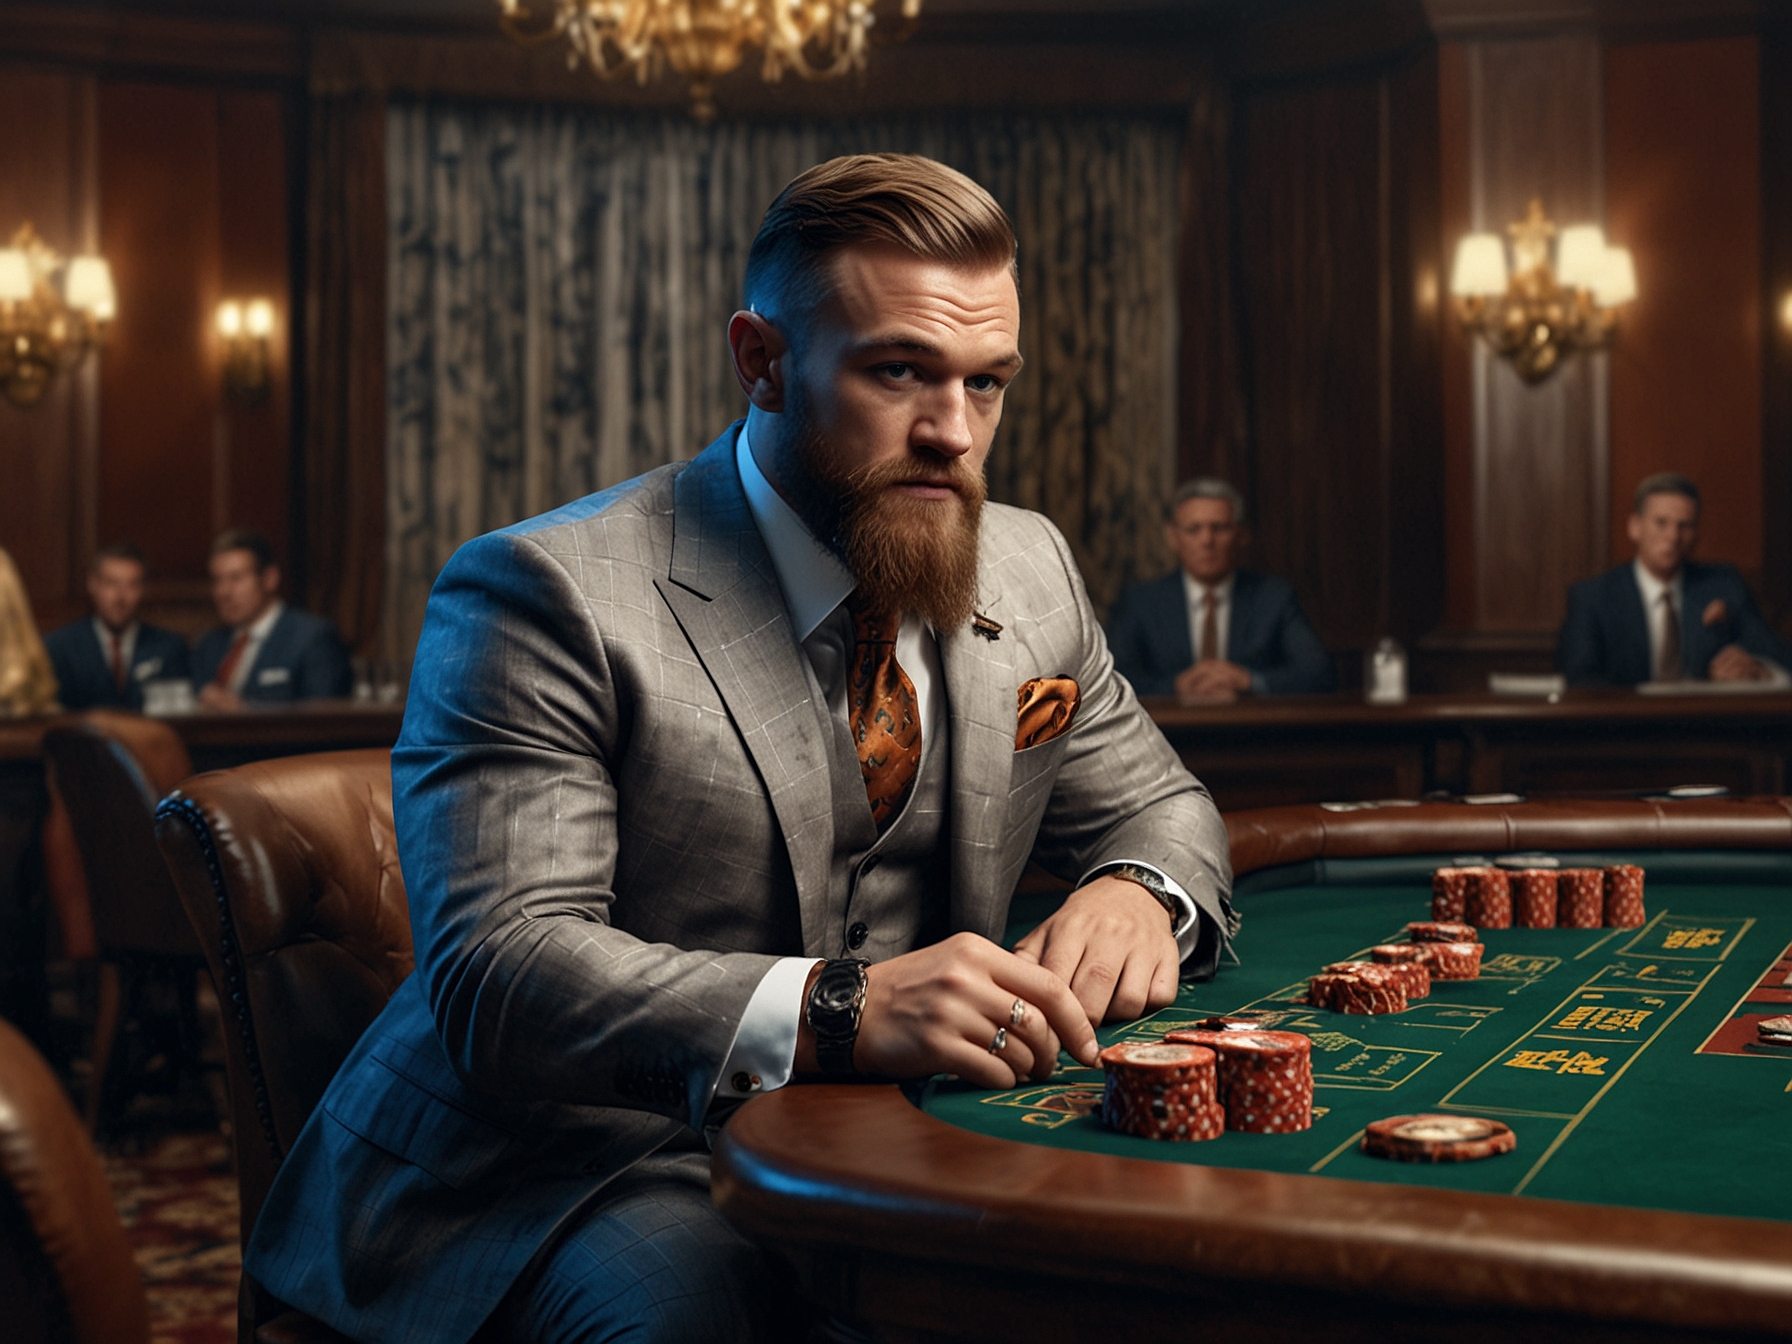 Conor McGregor places a high-stakes bet in a luxurious setting, emphasizing his reputation for bold wagers. This highlights his confident demeanor in high-risk scenarios.